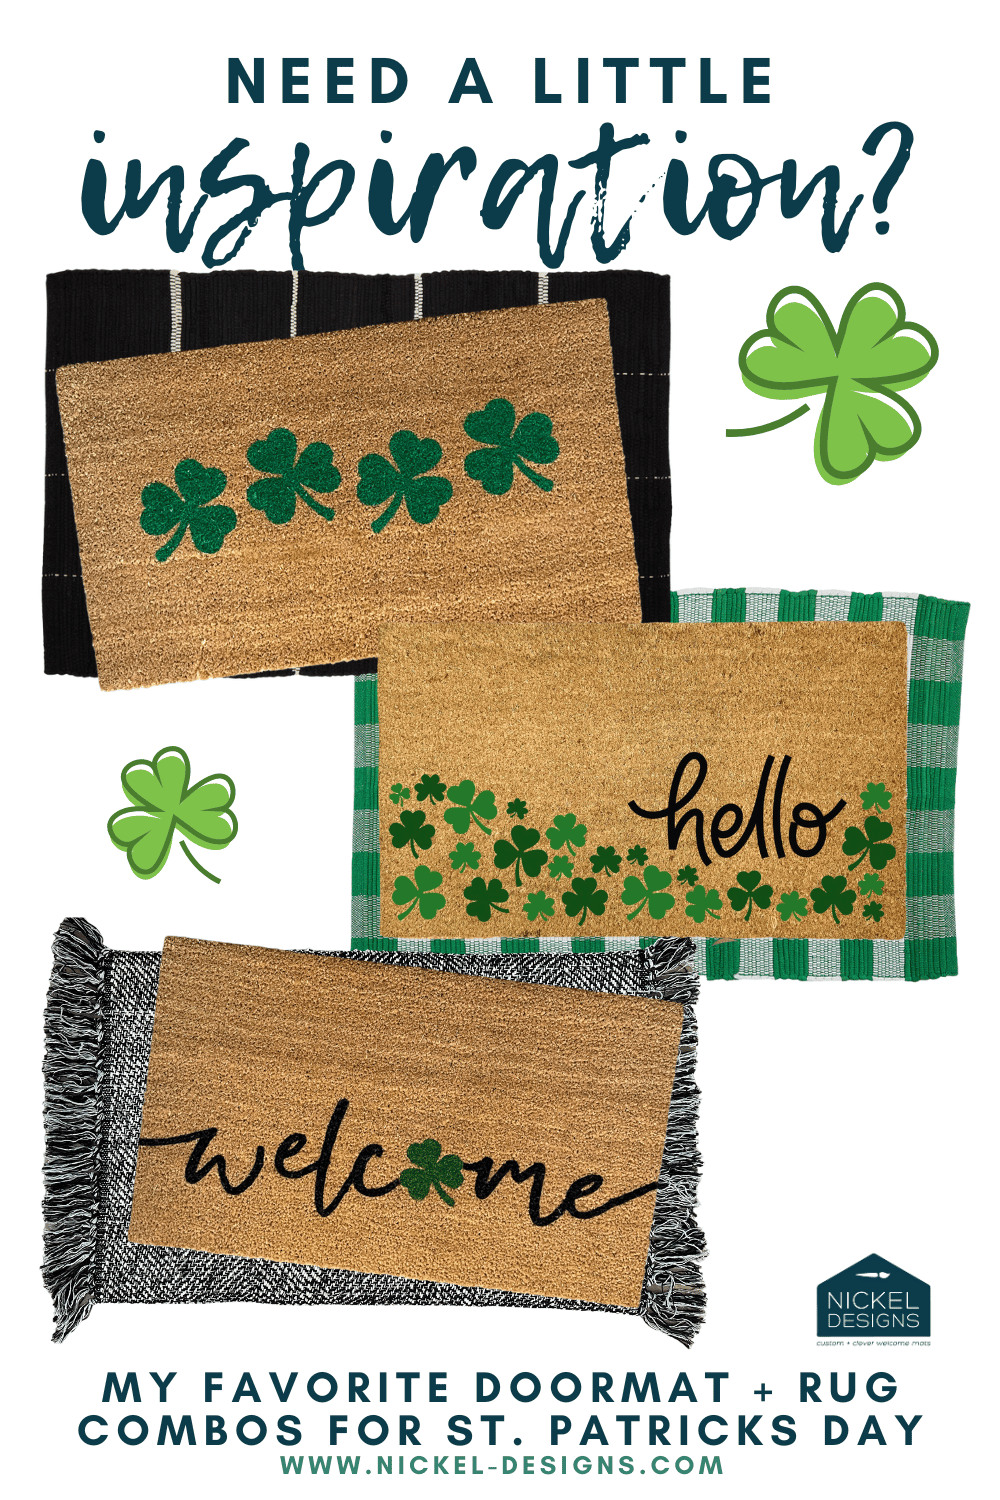 Welcoming St. Patrick's Day: Introducing Our Festive Doormat Collection!